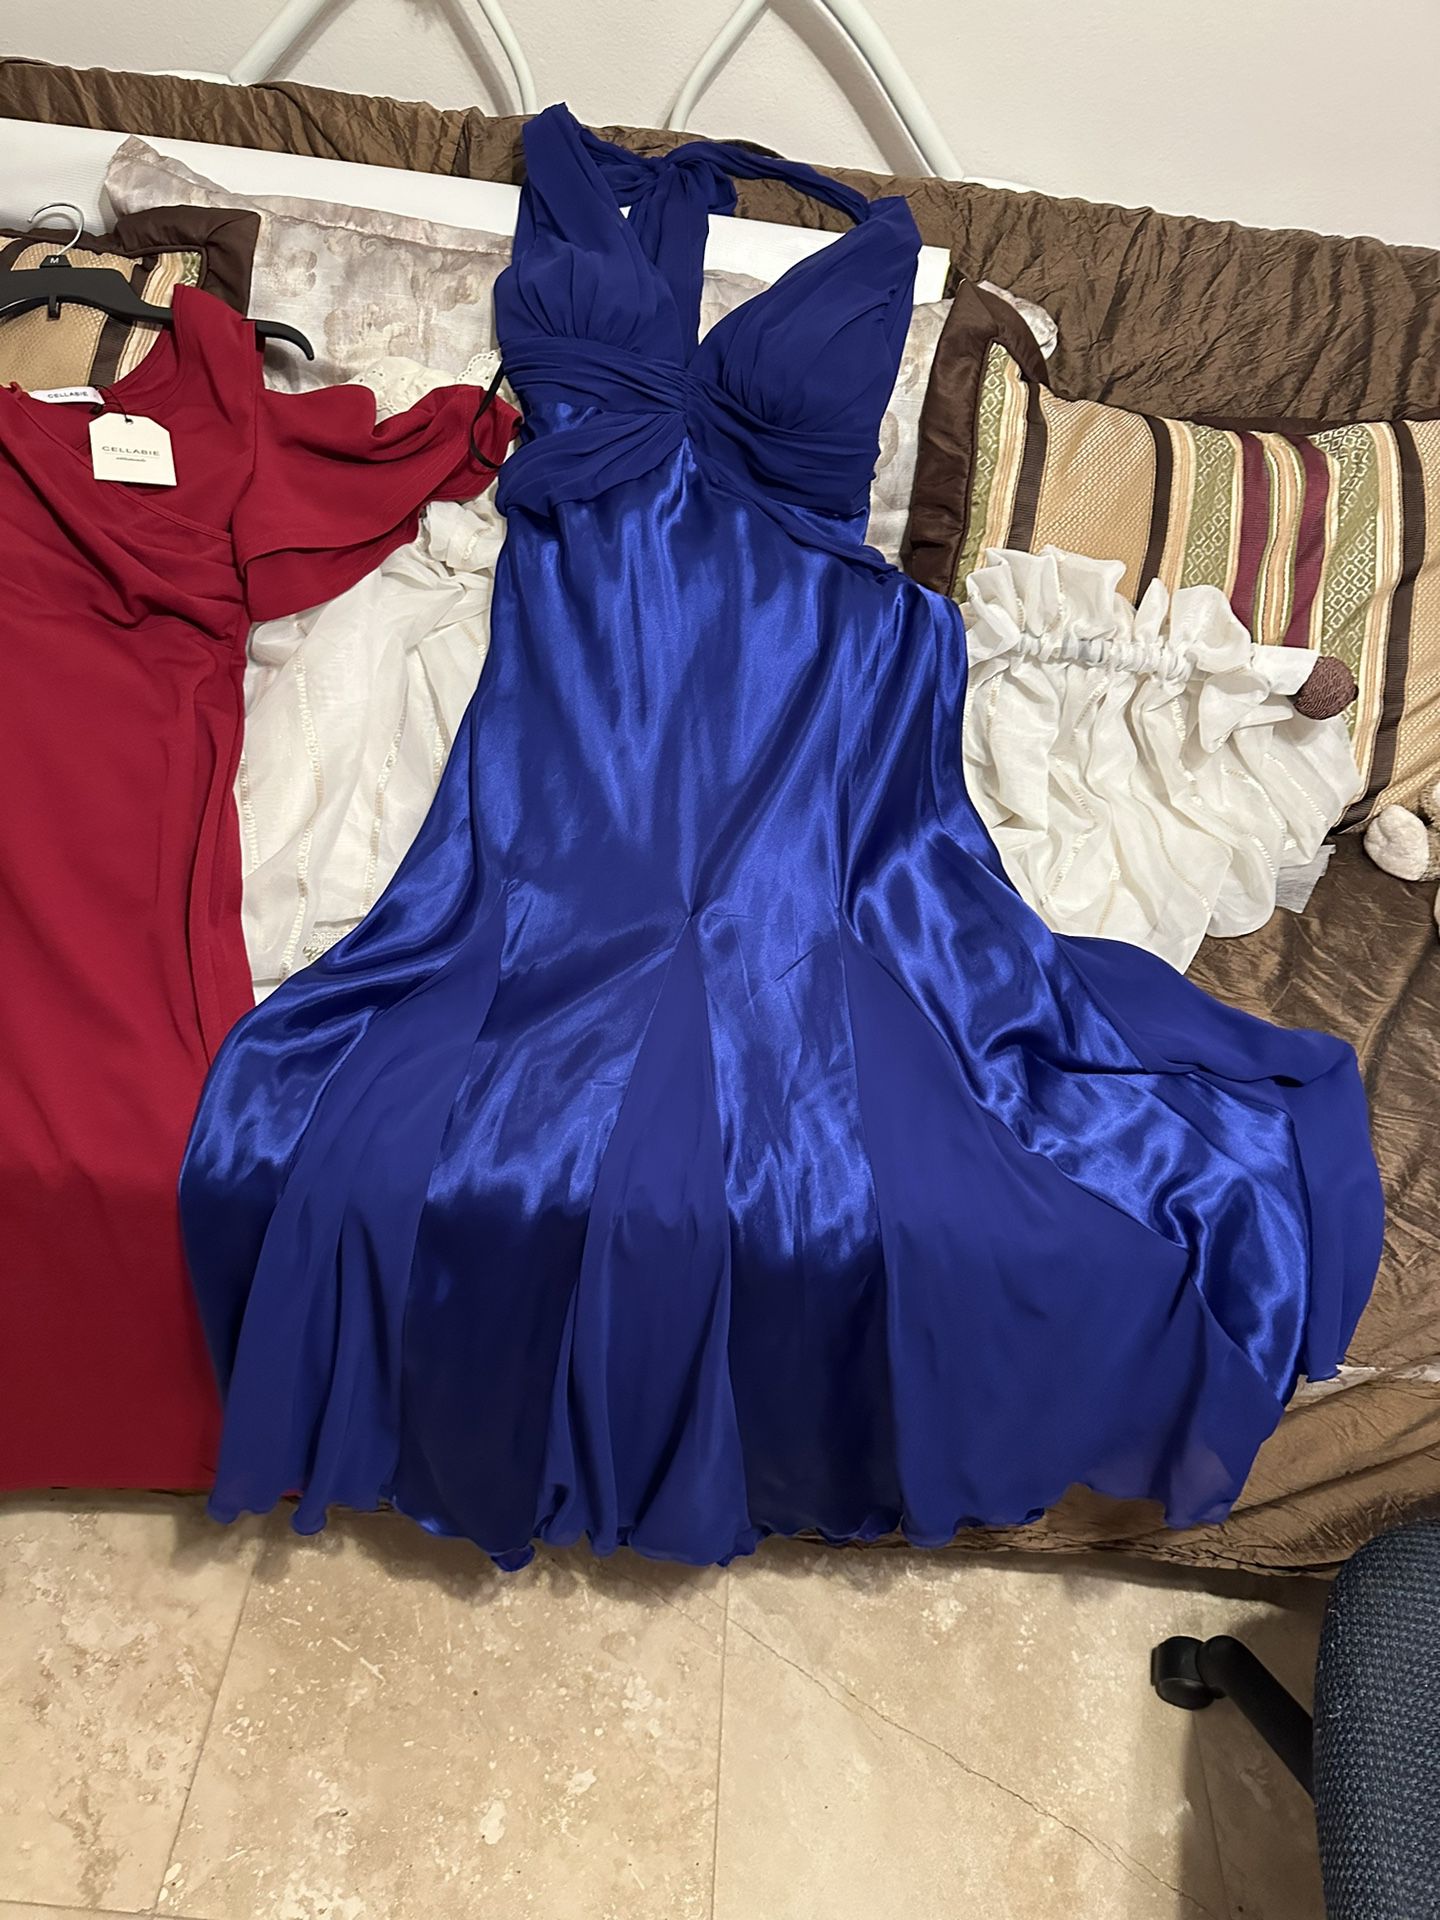 Two Stunning Beautiful long Dresses Both long-red Is New & Large- Blue Med Like New